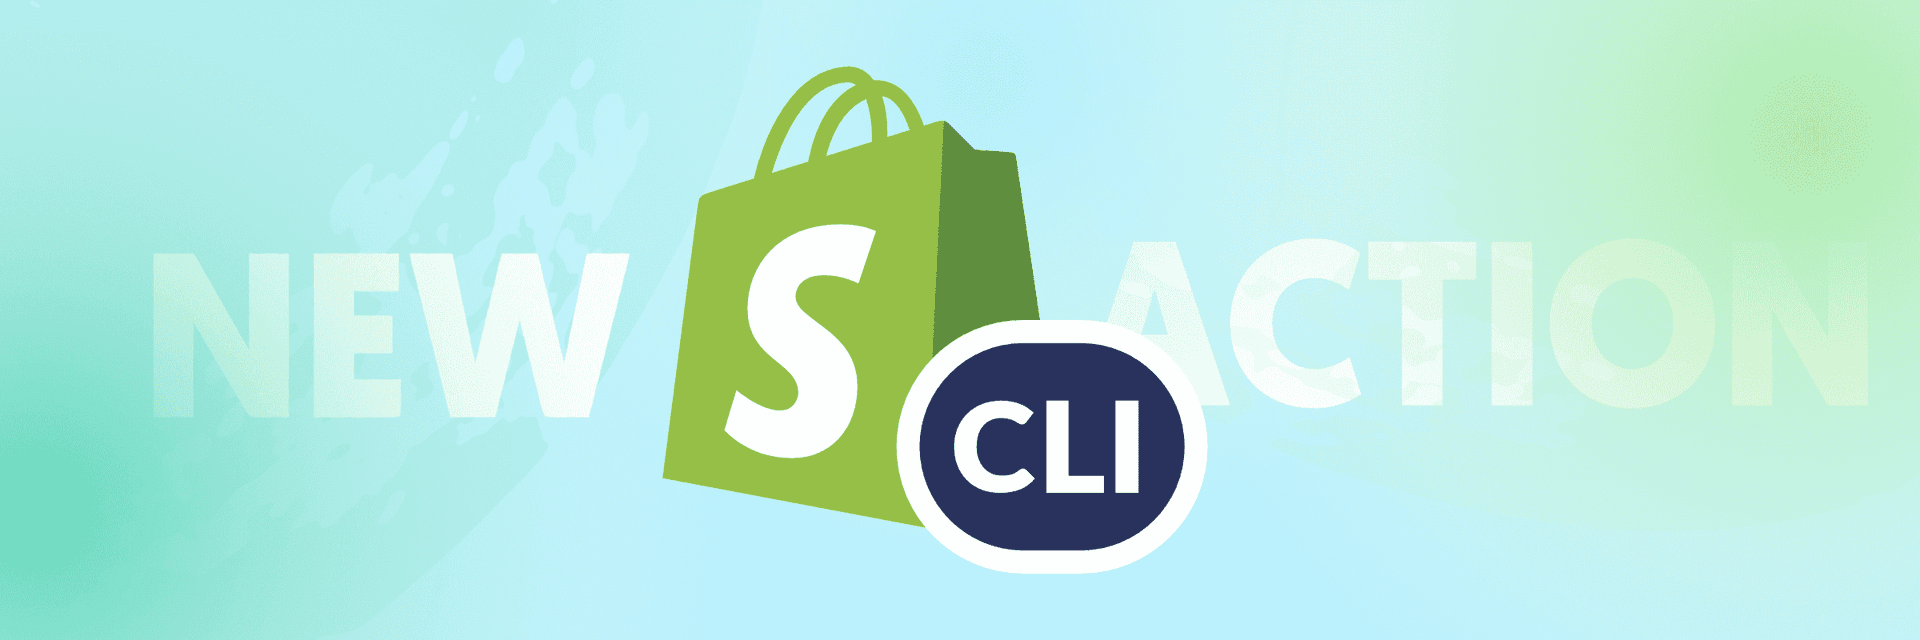 New action: Shopify CLI 🛍️